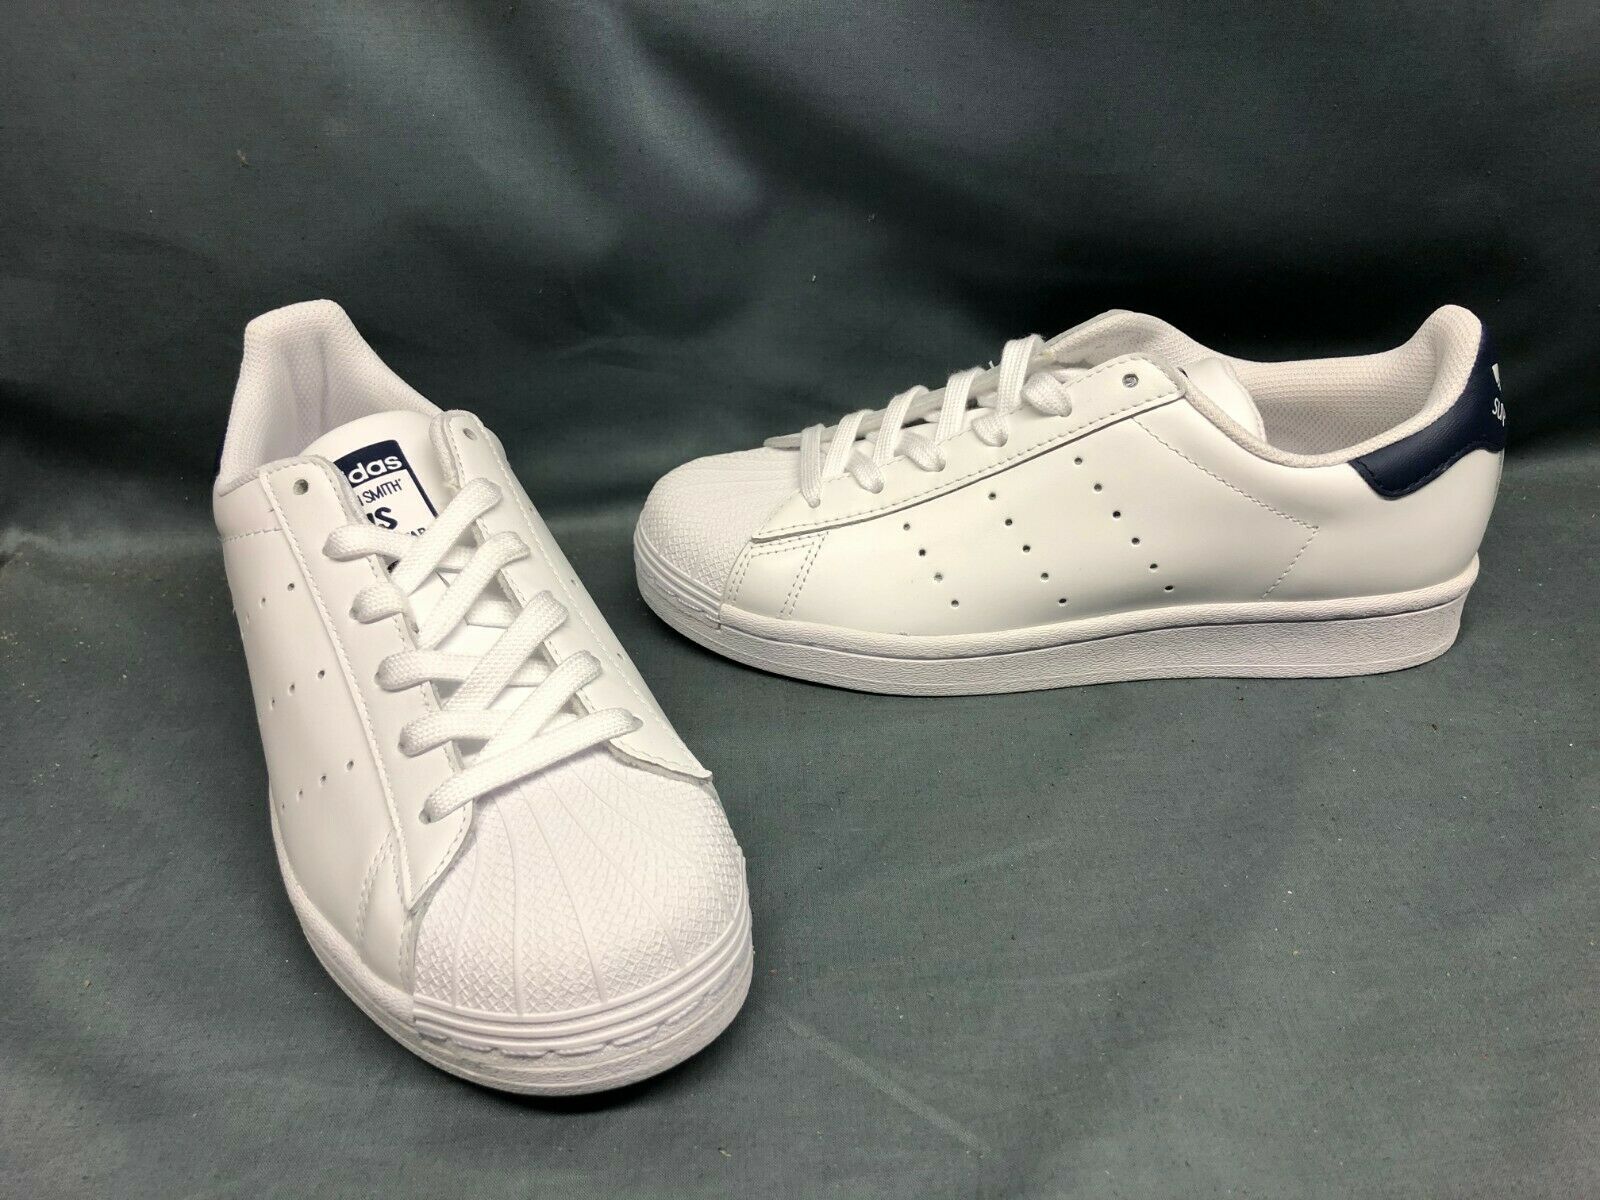 Adidas Women's SuperStan Fashion Sneakers Leather White Navy Size 9.5 NEW!